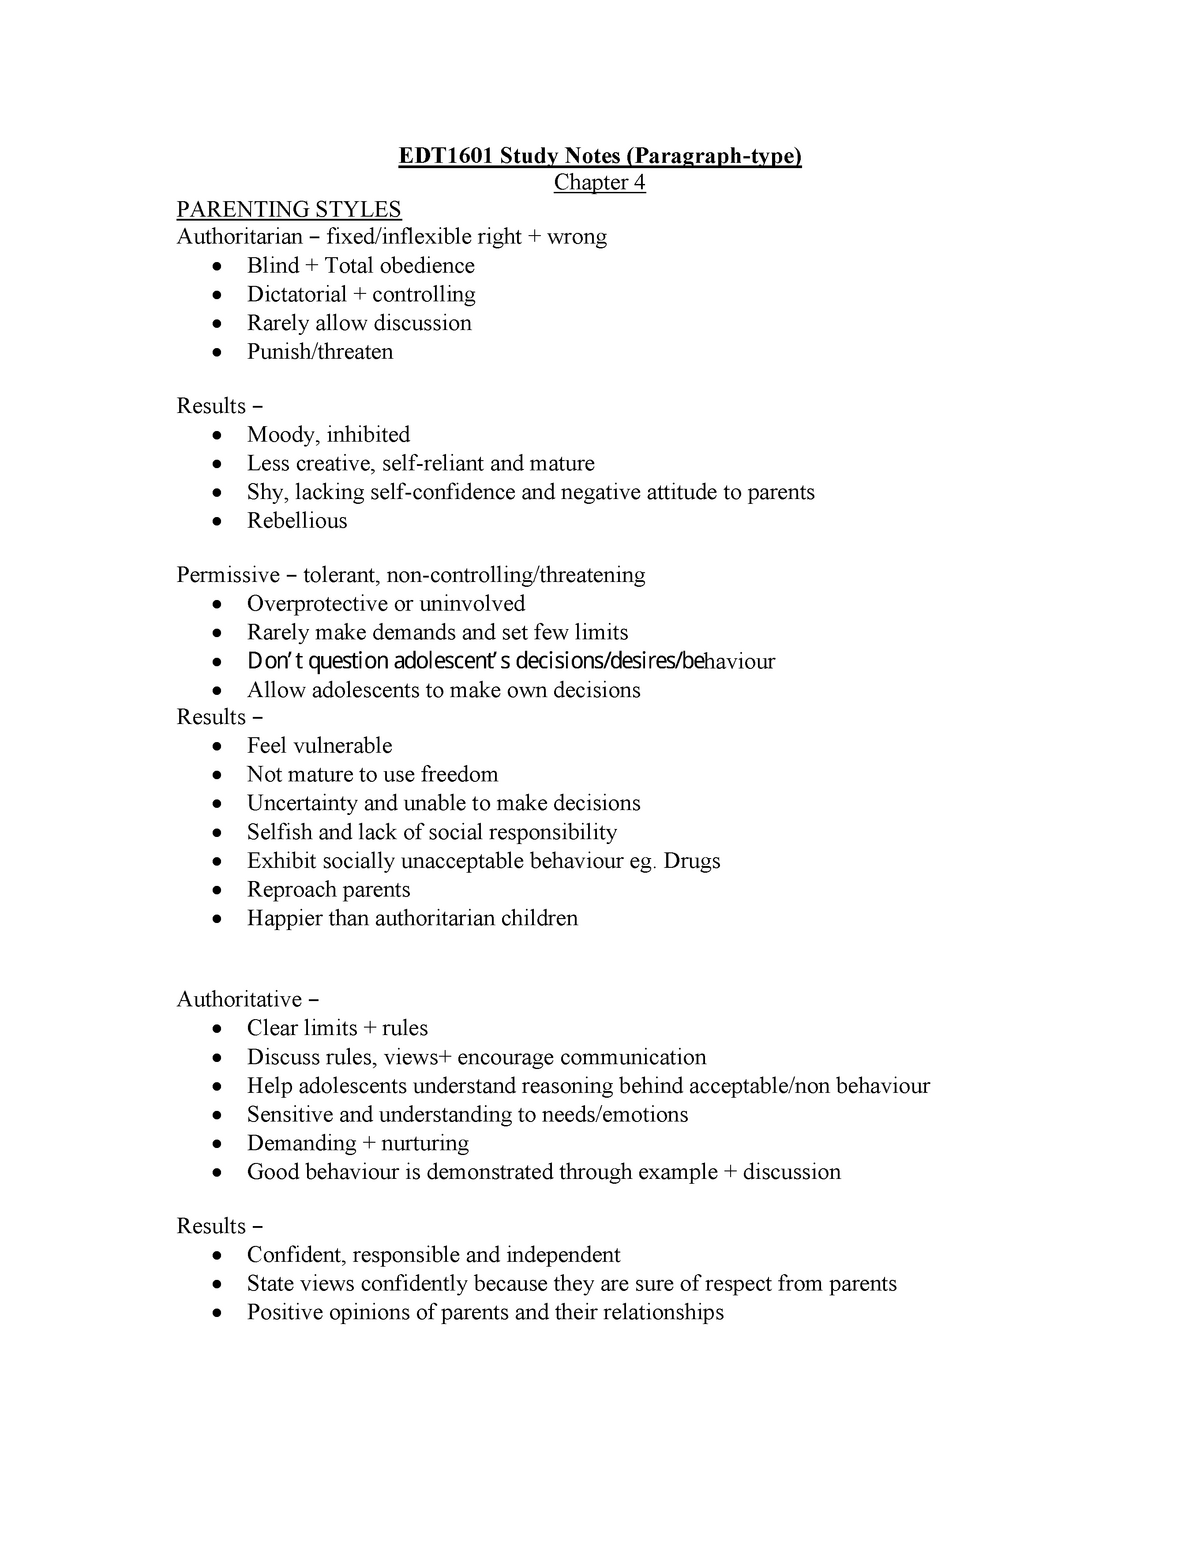 EDT1601 20 Notes - EDT1601 Study Notes (Paragraph-type) Chapter 4 ...